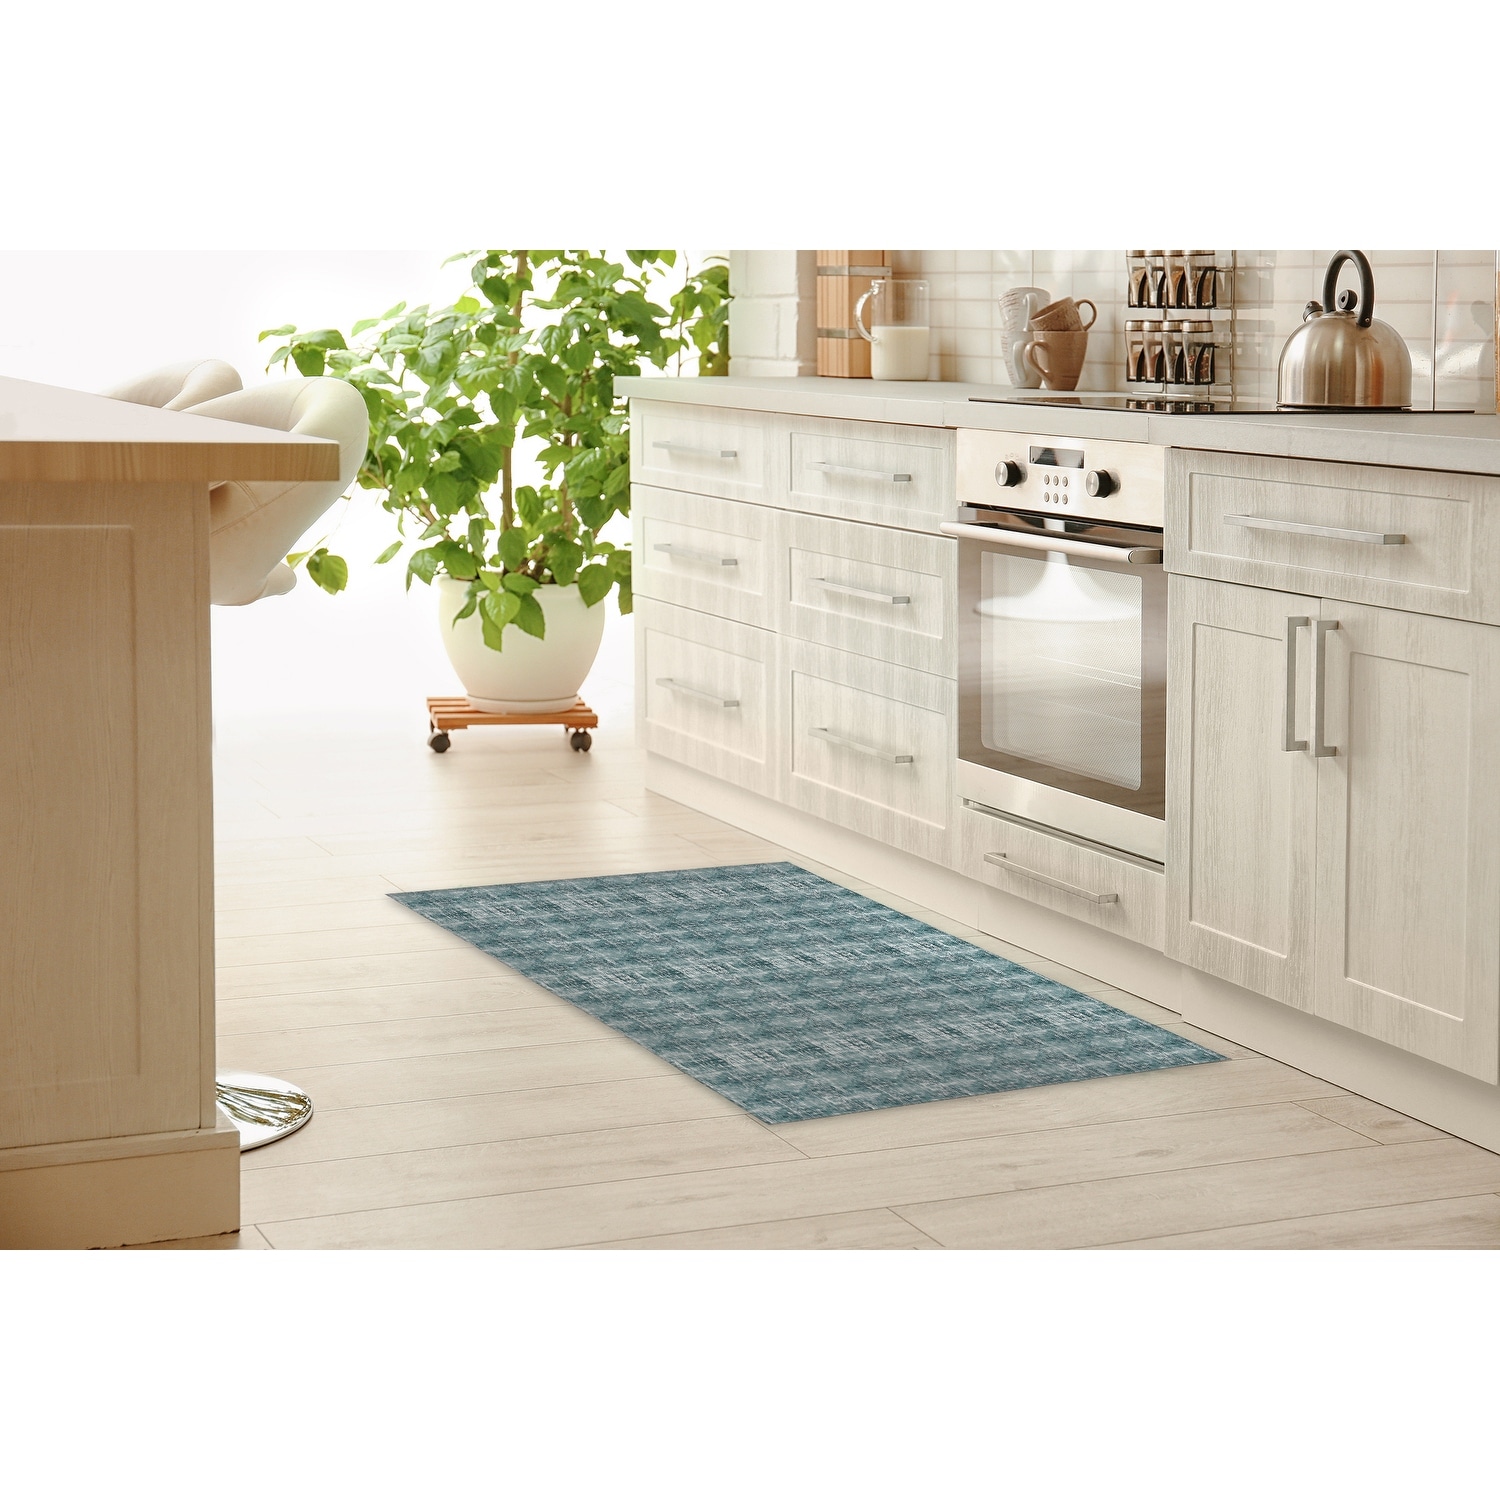 Nuloom Faded Floral Kitchen Or Laundry Comfort Mat, 20 X 36